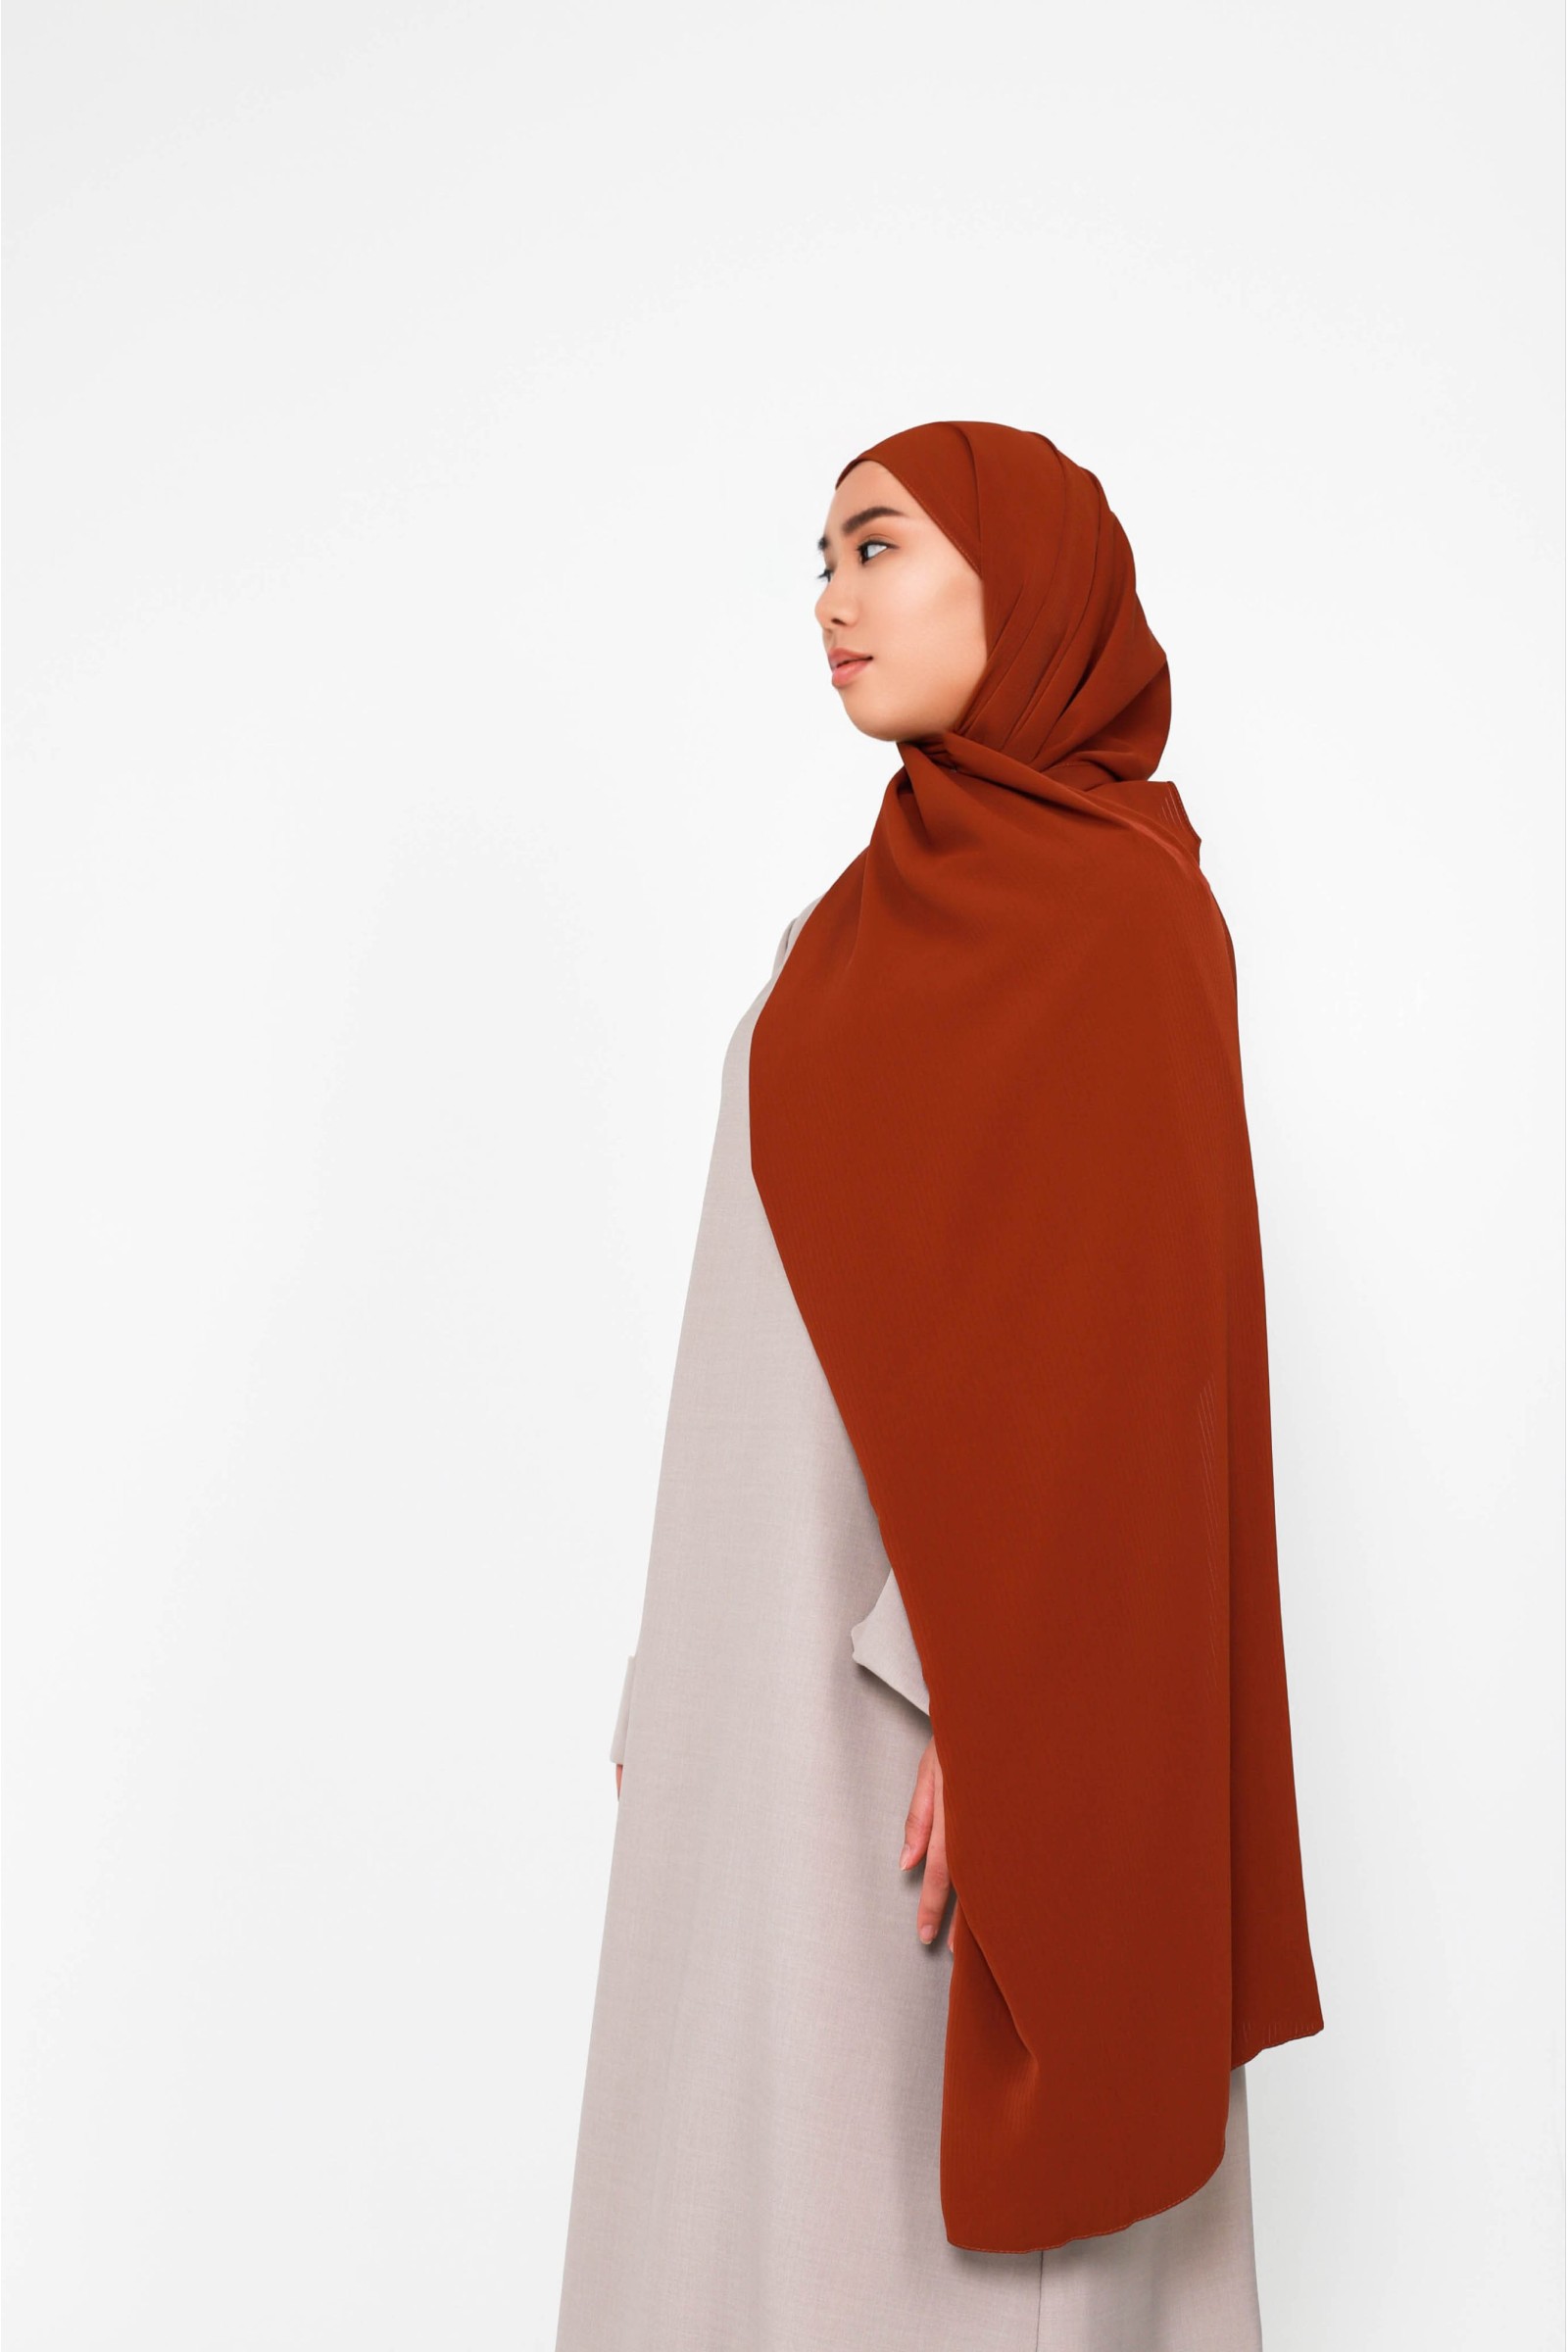 Scarf easy to put on without clip ideal for Muslim women